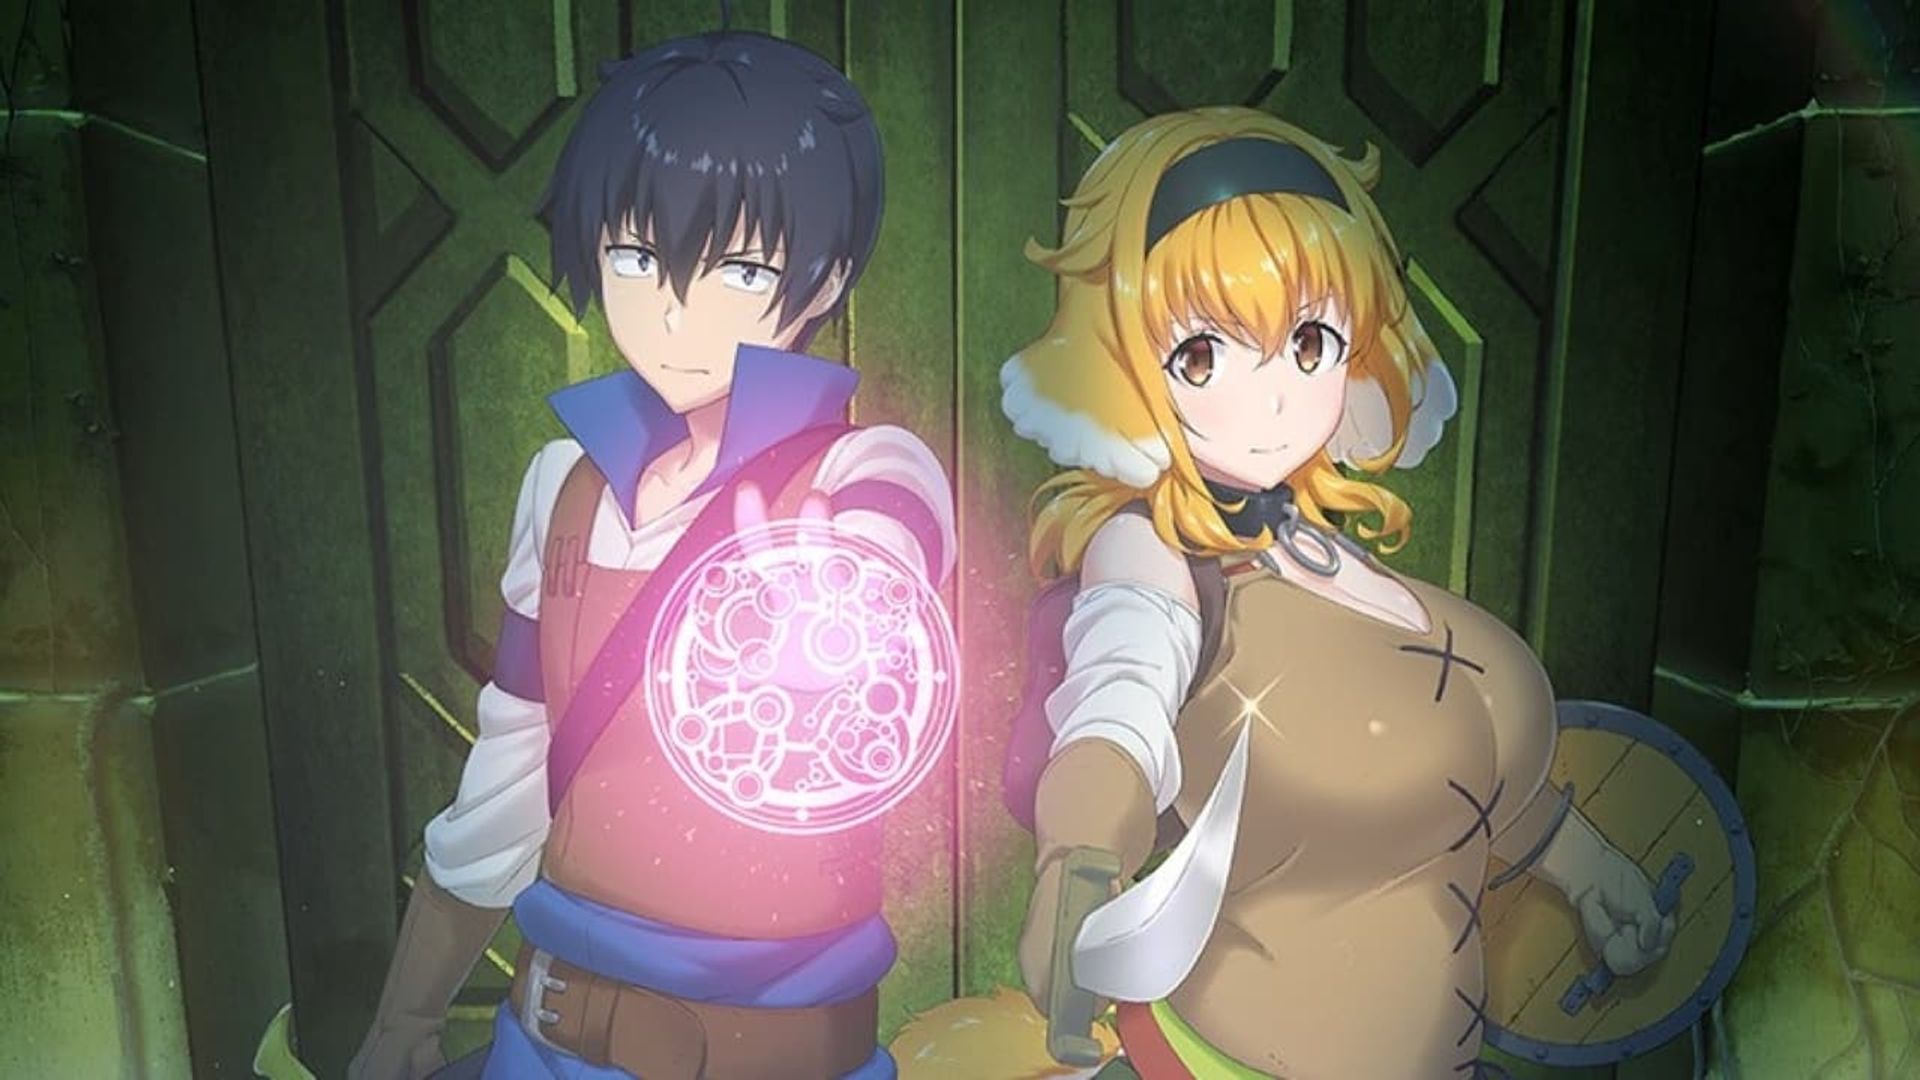 Slave) Harem in the Labyrinth of Another World - Anime Review